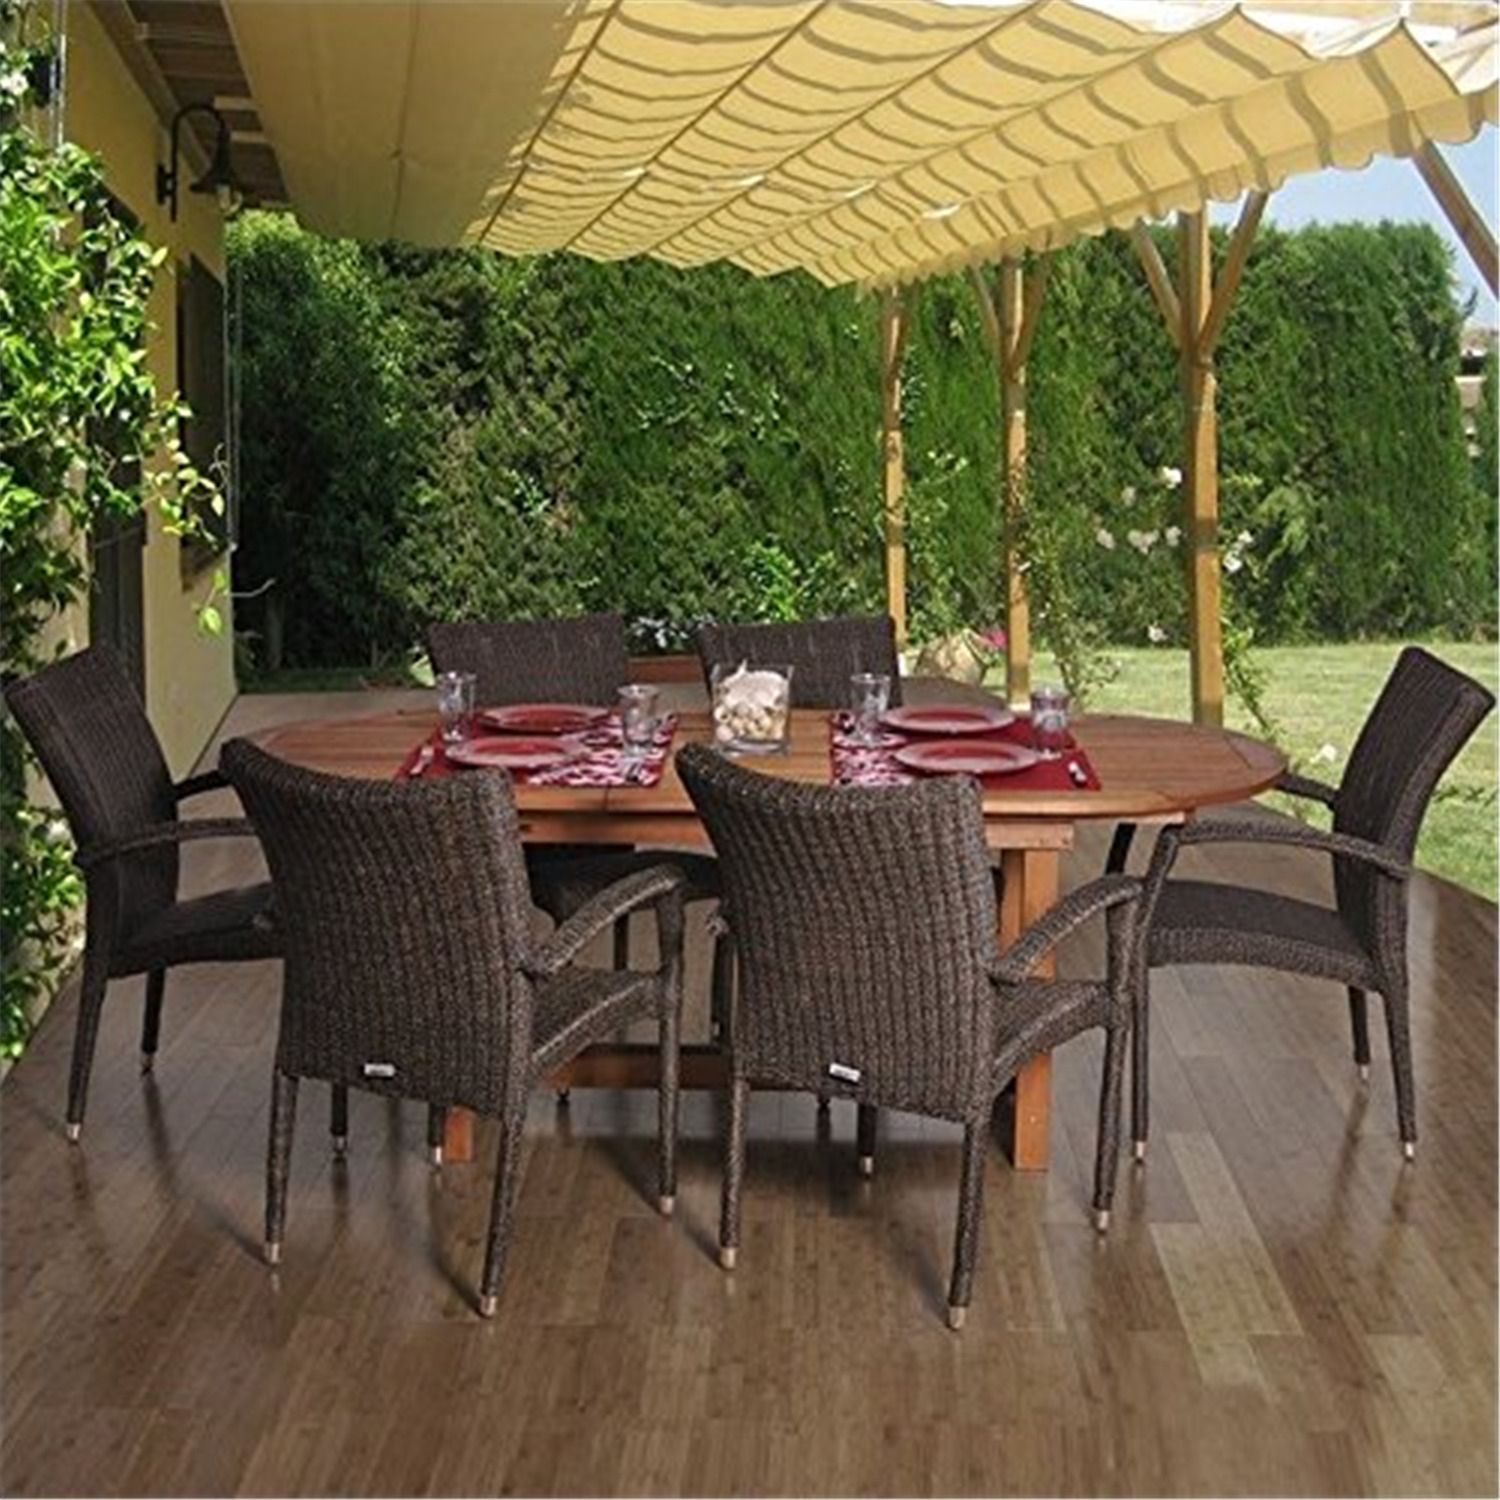 Lemans Deluxe 7 Piece Eucalyptus/Wicker Extendable Oval Patio Dining Intended For Extendable 7 Piece Patio Dining Sets (View 1 of 15)